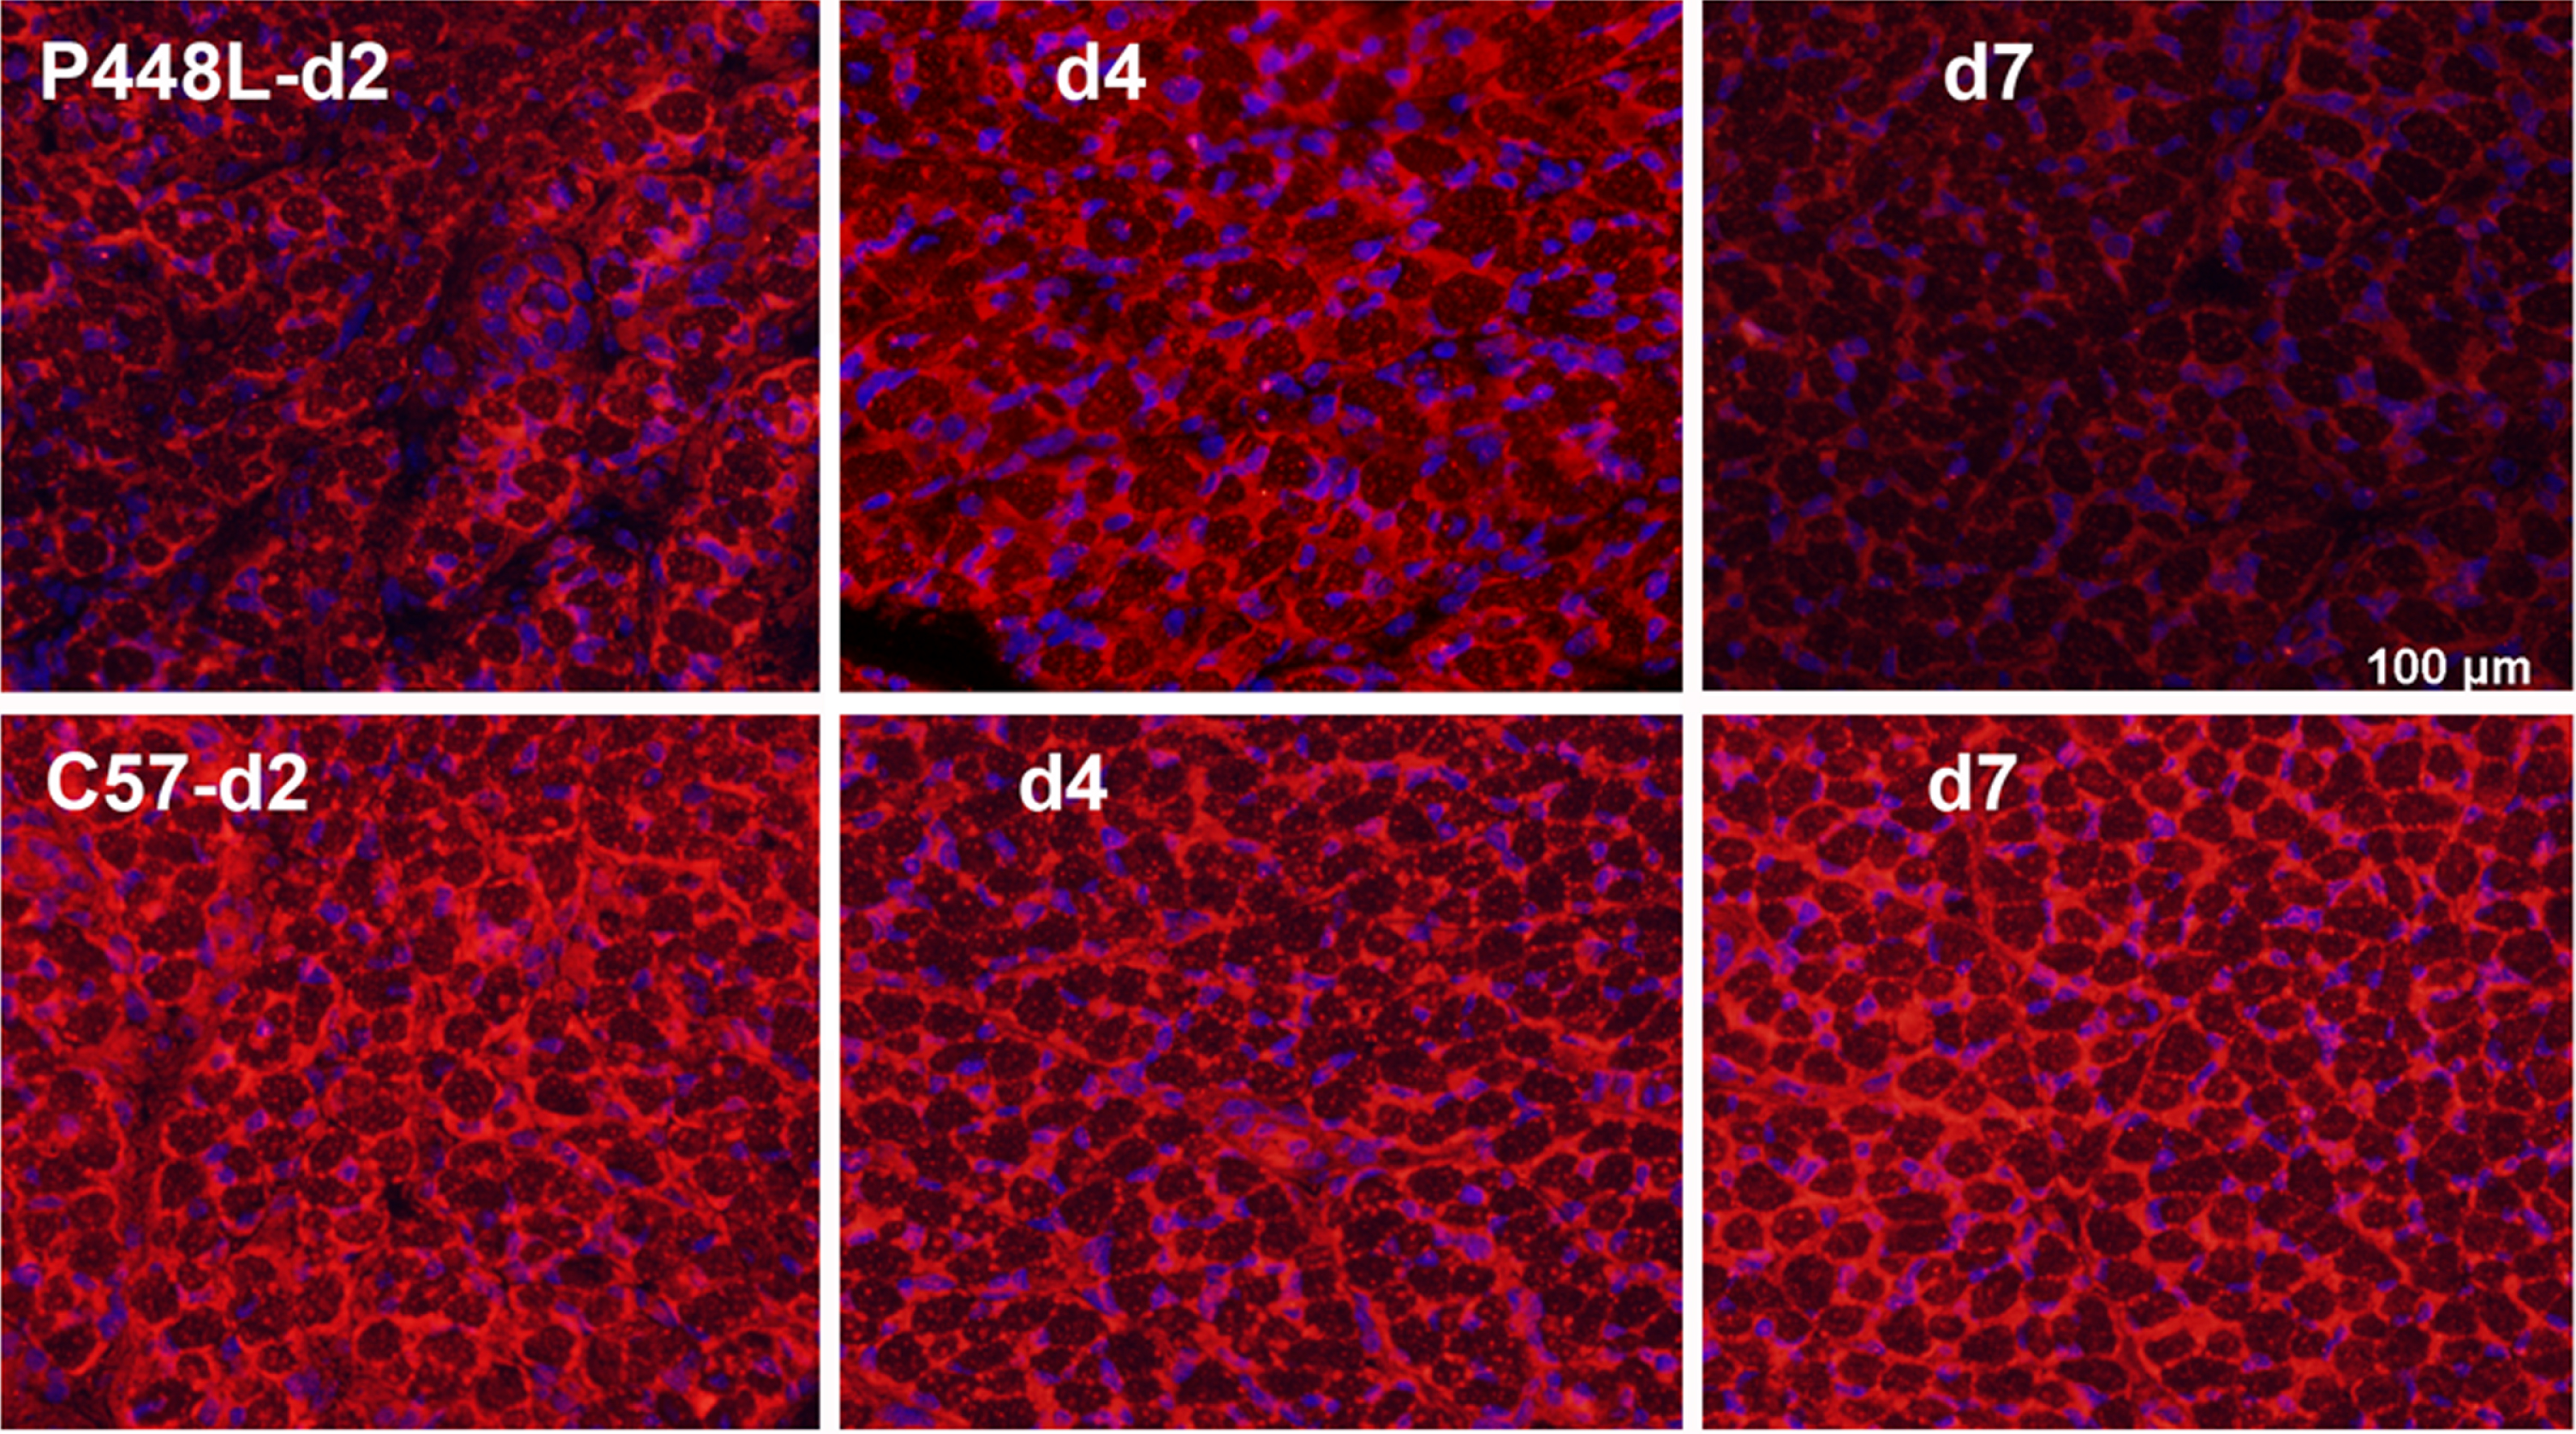 Matriglycan expression in new-born P448L FKRP mutant mice at postnatal day 2 (d2) to day 7 (d7) in comparison with C57 normal mice. Matriglycan (red) on α-DG is recognized by primary monoclonal antibody IIH6((EMD Millipore) (1:500) and detected with secondary Alexa Fluor 594 goat anti-mouse (Invitrogen). Except membrane localized signal, there is also diffuse cytoplasmic staining of the early myofibers as observed in the newly regenerated myofibers. Nuclei (blue) are stained with DAPI.